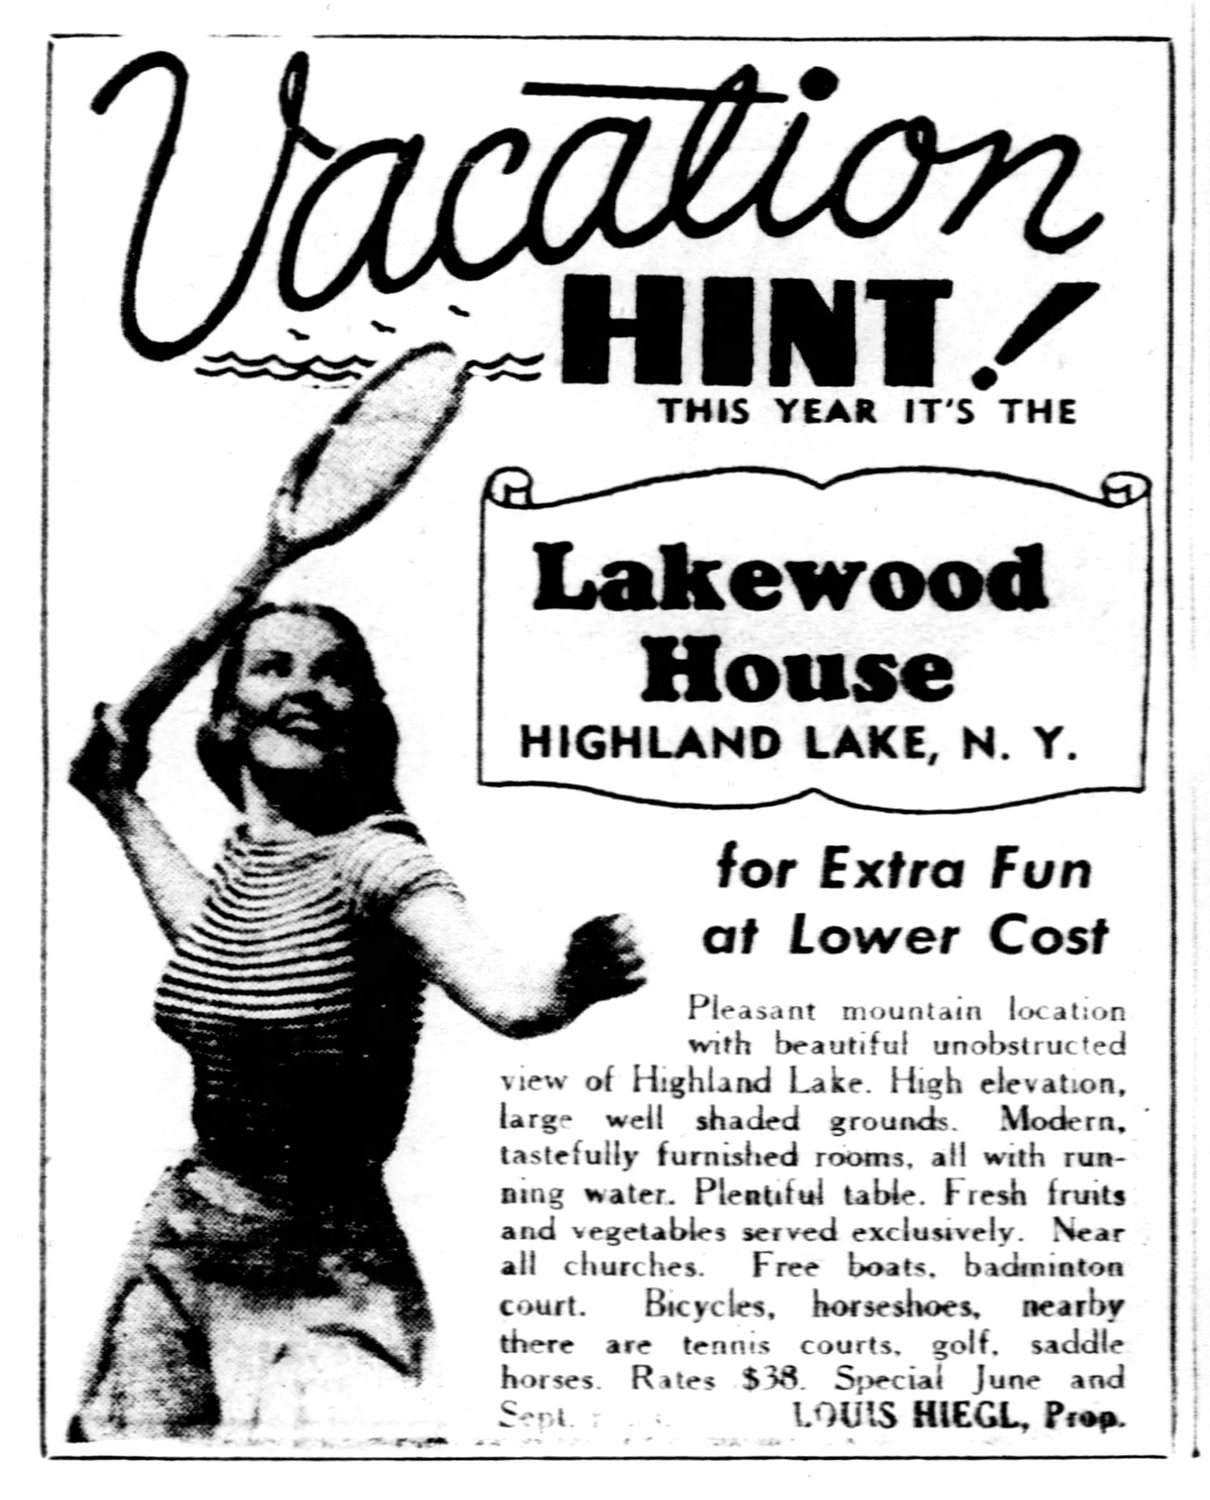 Visit the Lakewood House for extra fun at lower cost! An image of bygone times, this ad reminds us about the boardinghouse days on Highland Lake.